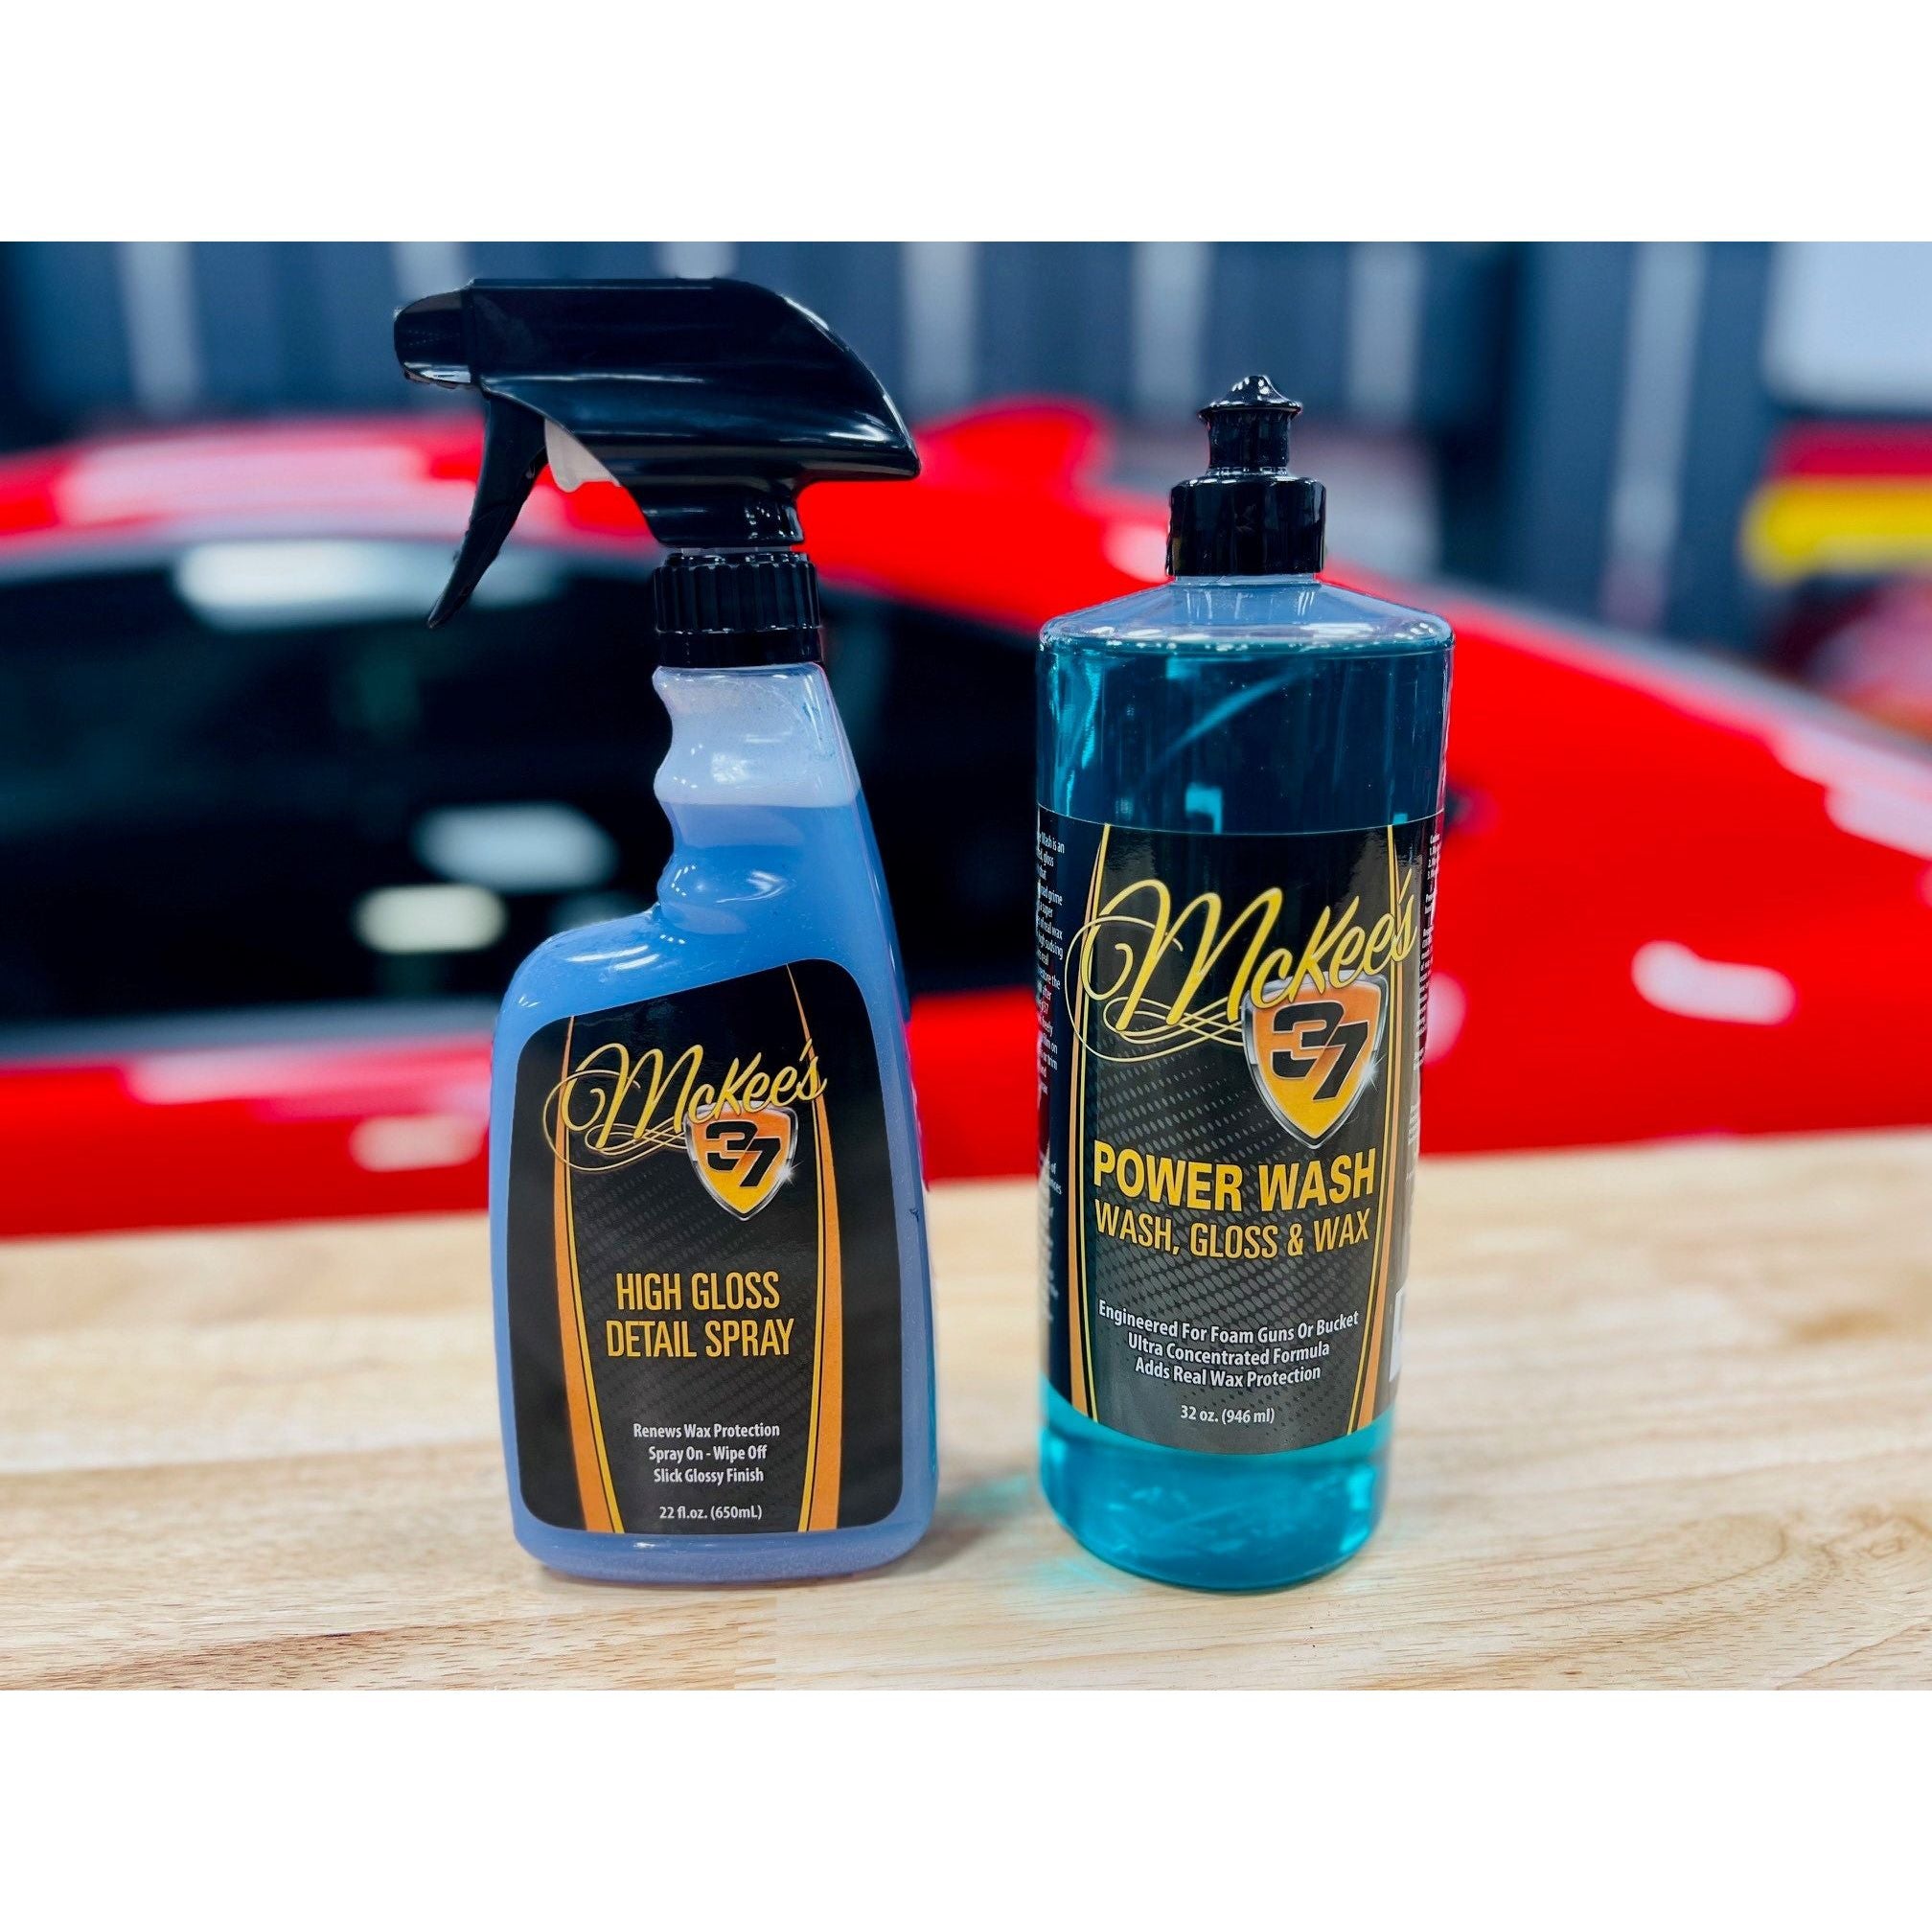 Tips for Washing Car in Direct Sun with McKee's 37 Sio2 Auto Wash 